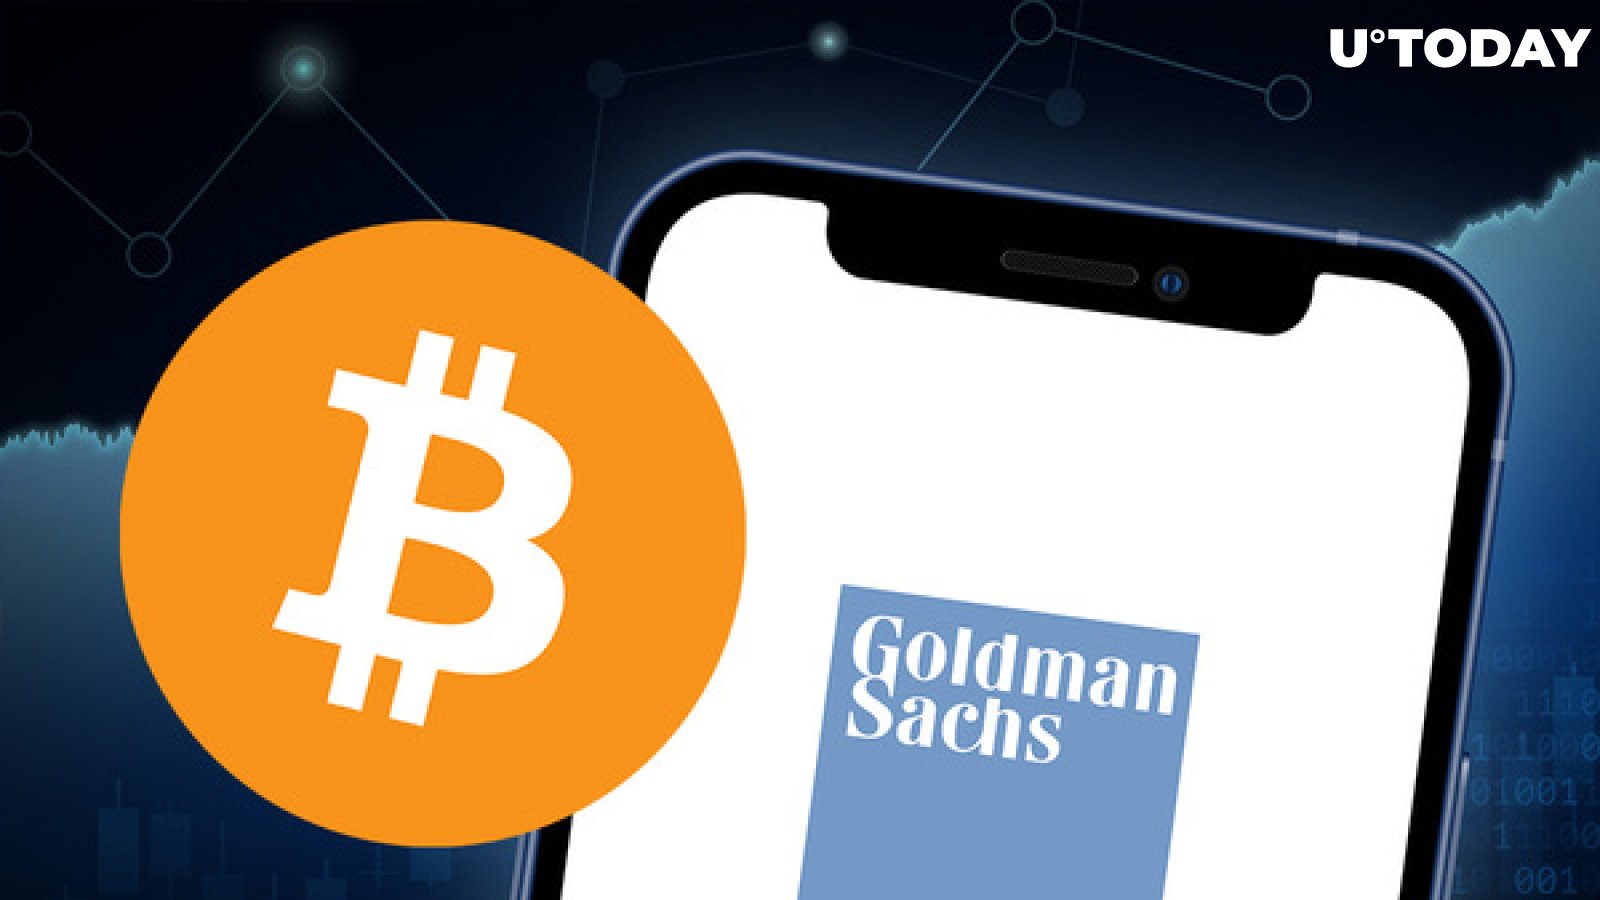 BREAKING: Goldman Sachs May Start Offering Bitcoin to Wealthy Clients Later This Year